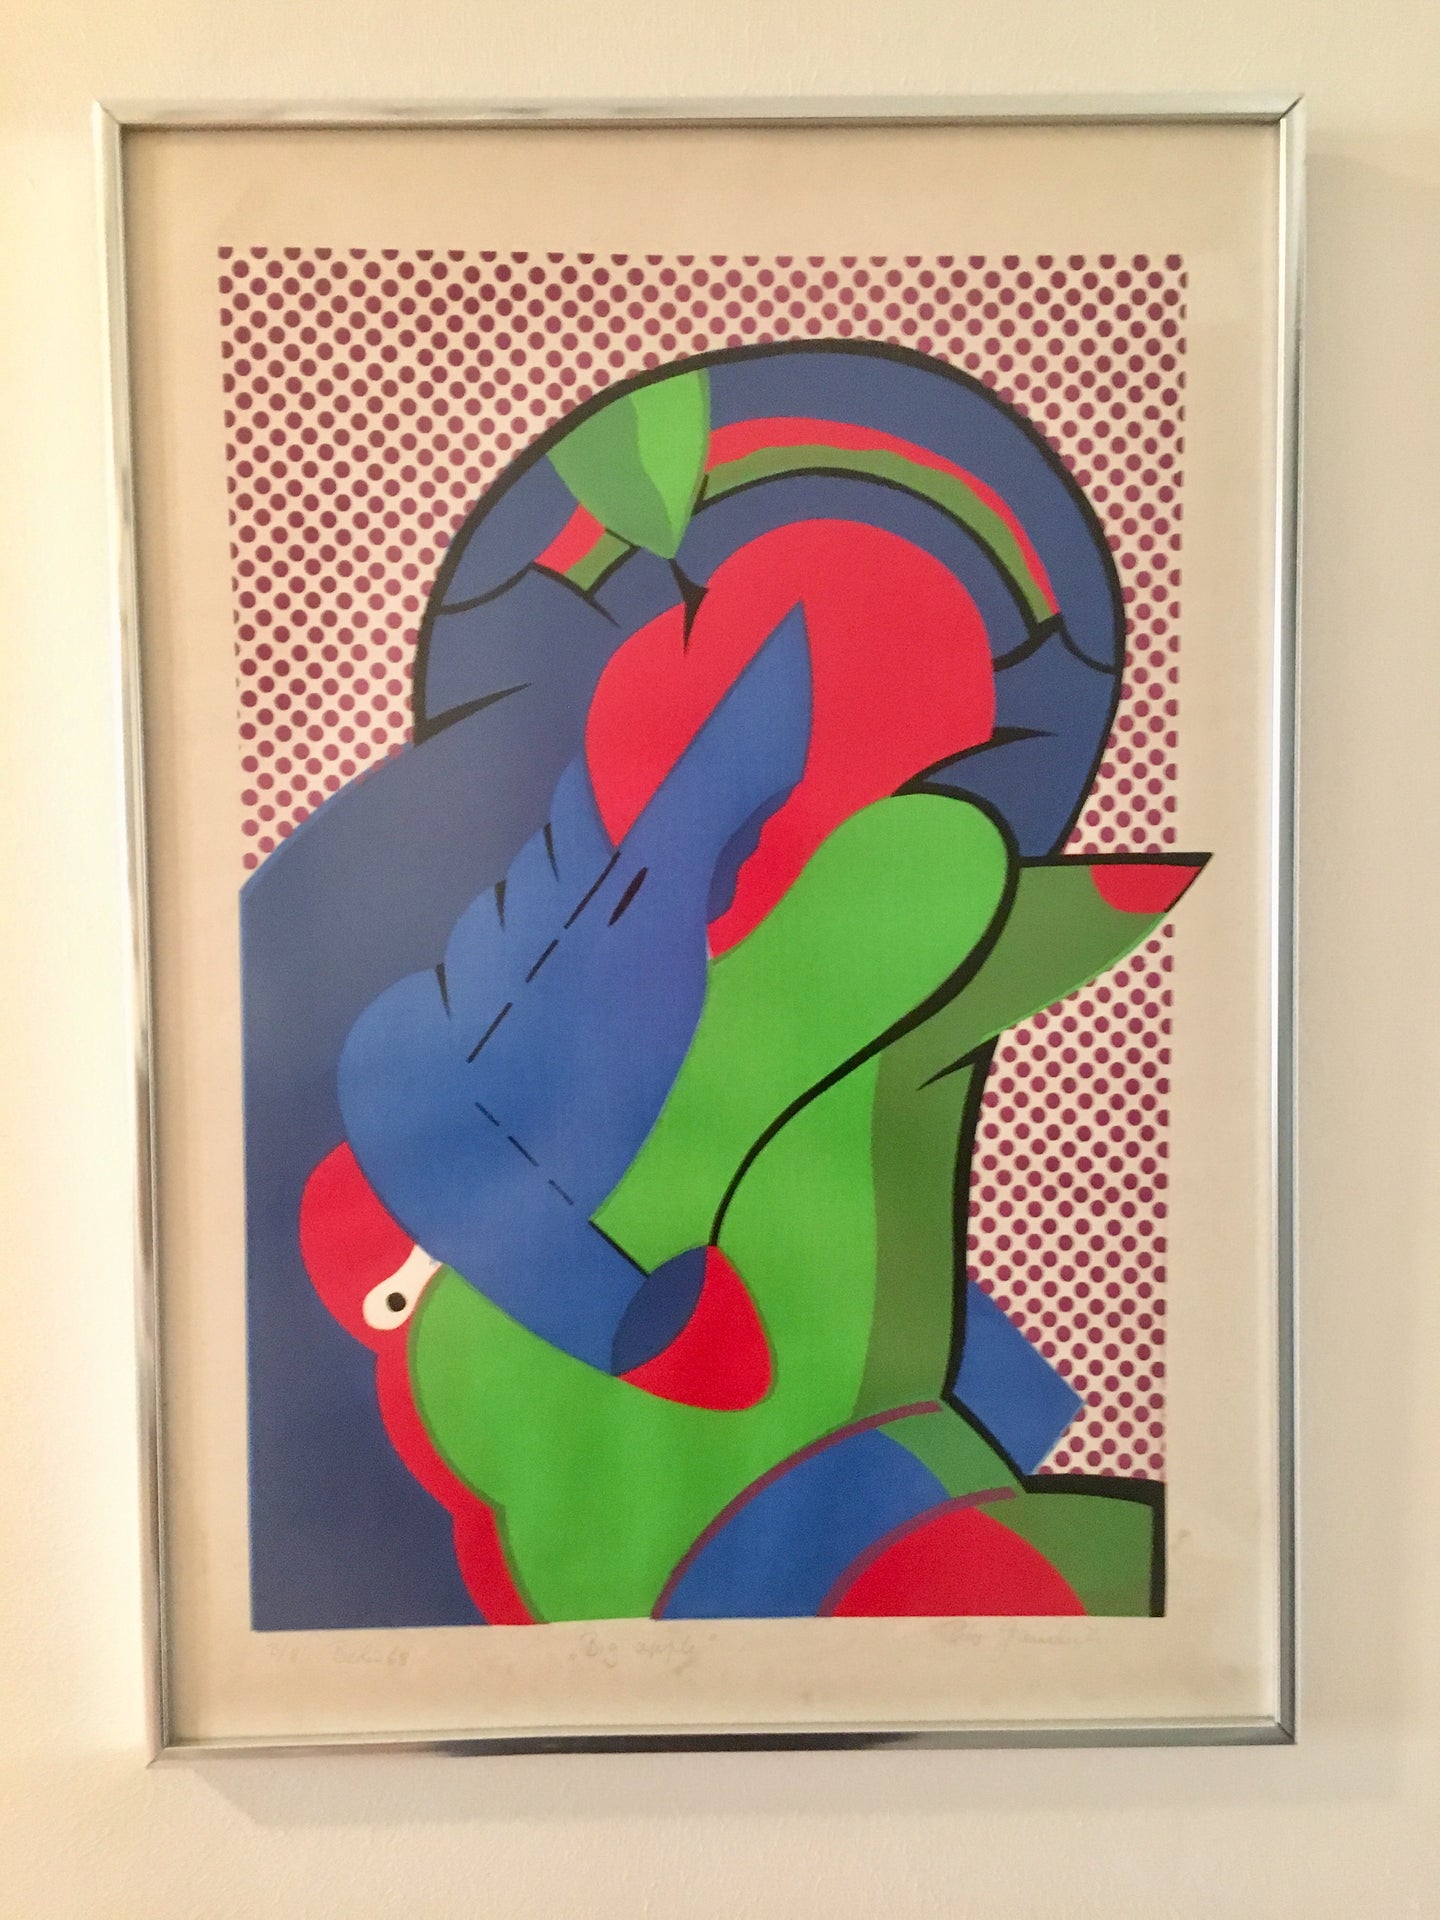 Mid Century Modern Pop Art Signed and Numbered Print by Peter Greenbilt